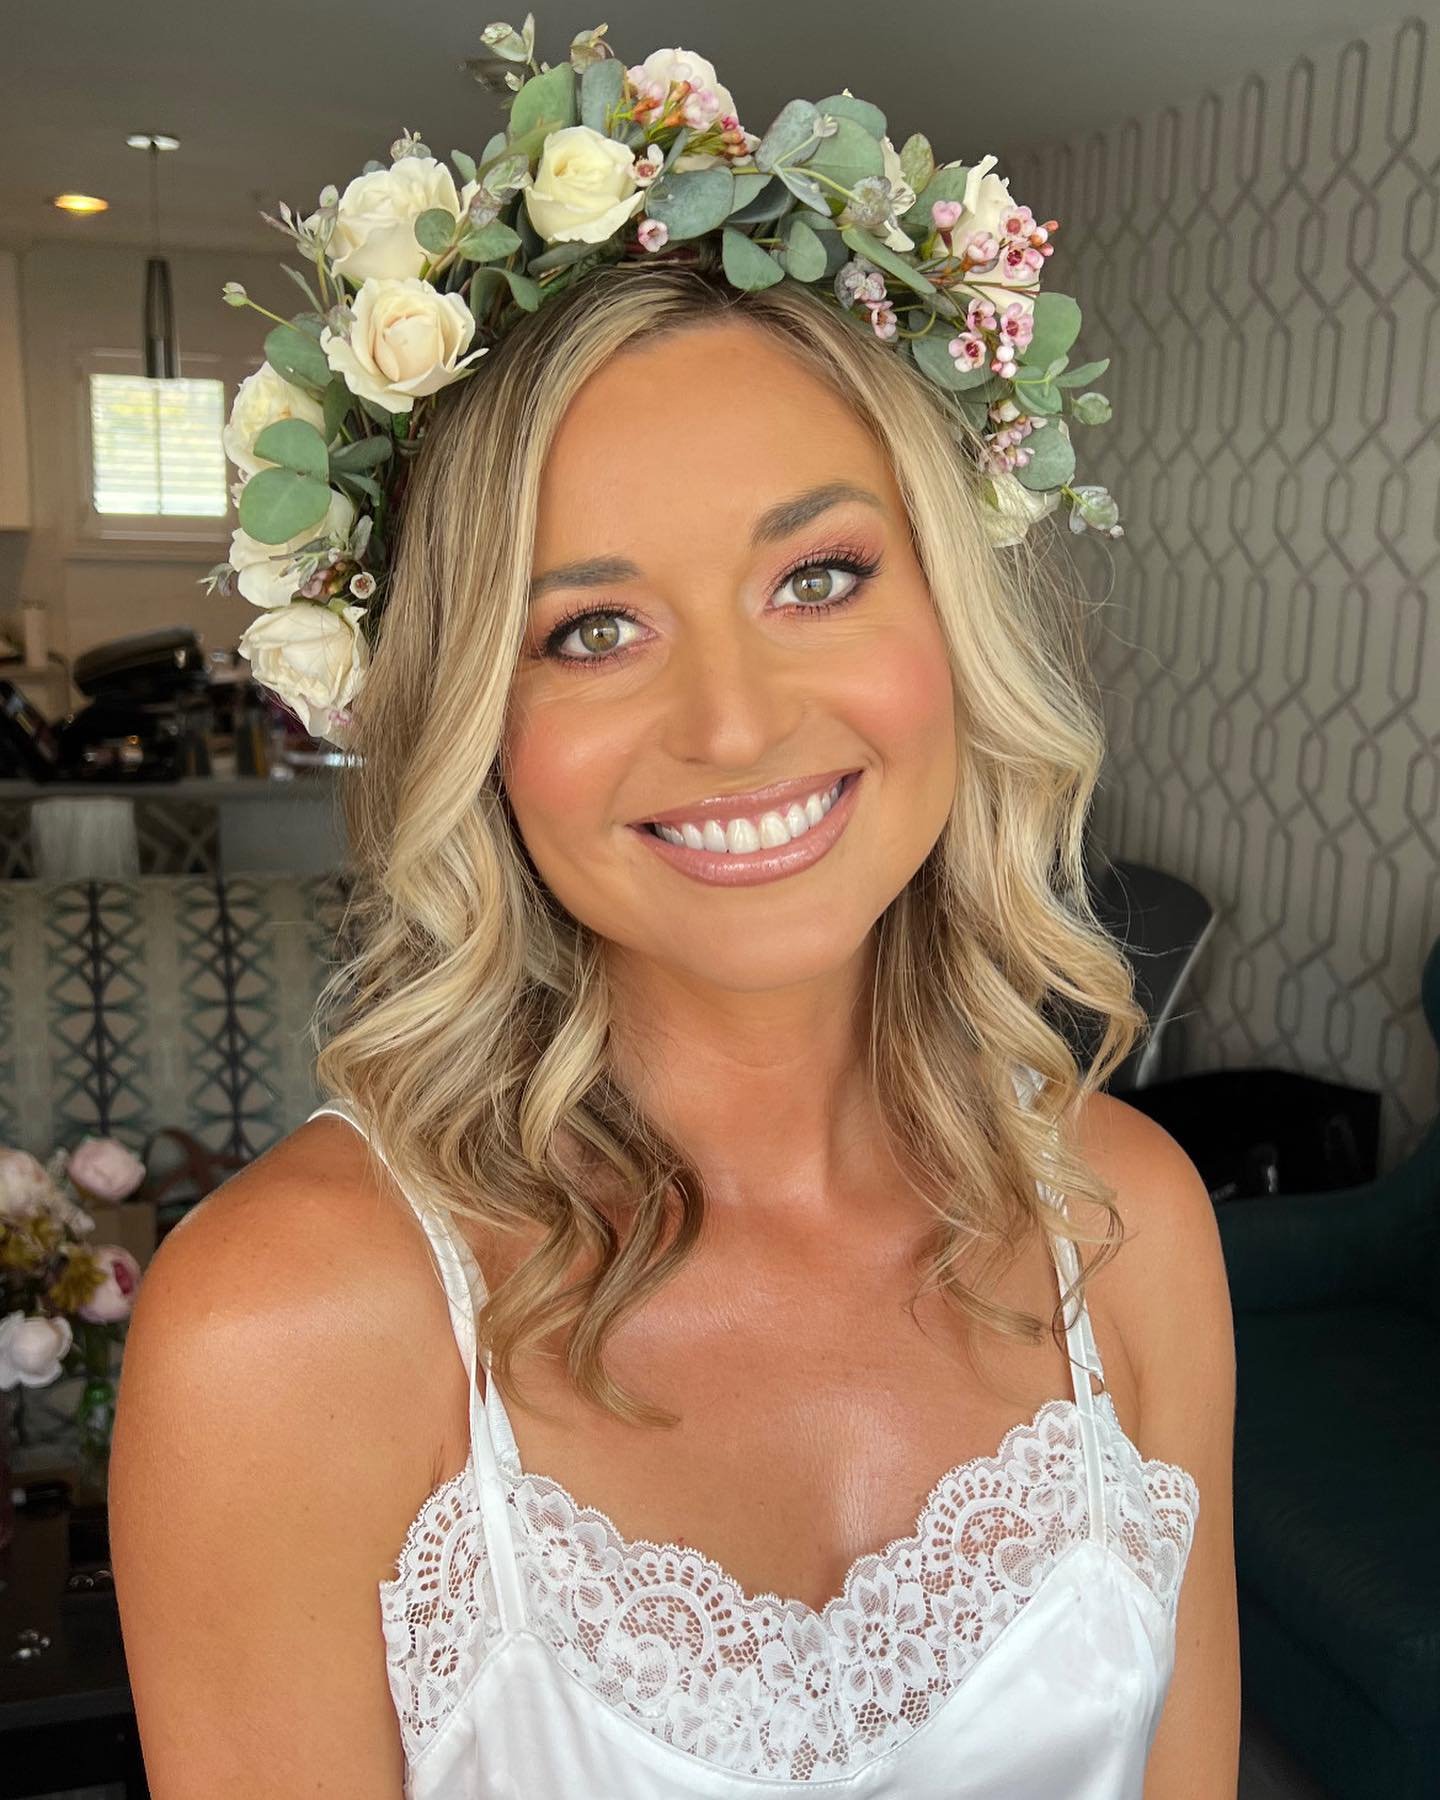 This wedding was so special to me because it was on one of my own girls from my team! @kaitlynweathers was beyond beautiful!! We went with glowing skin and rose gold tones for this boho bride. 
The wedding itself was gorgeous and filled with so much 